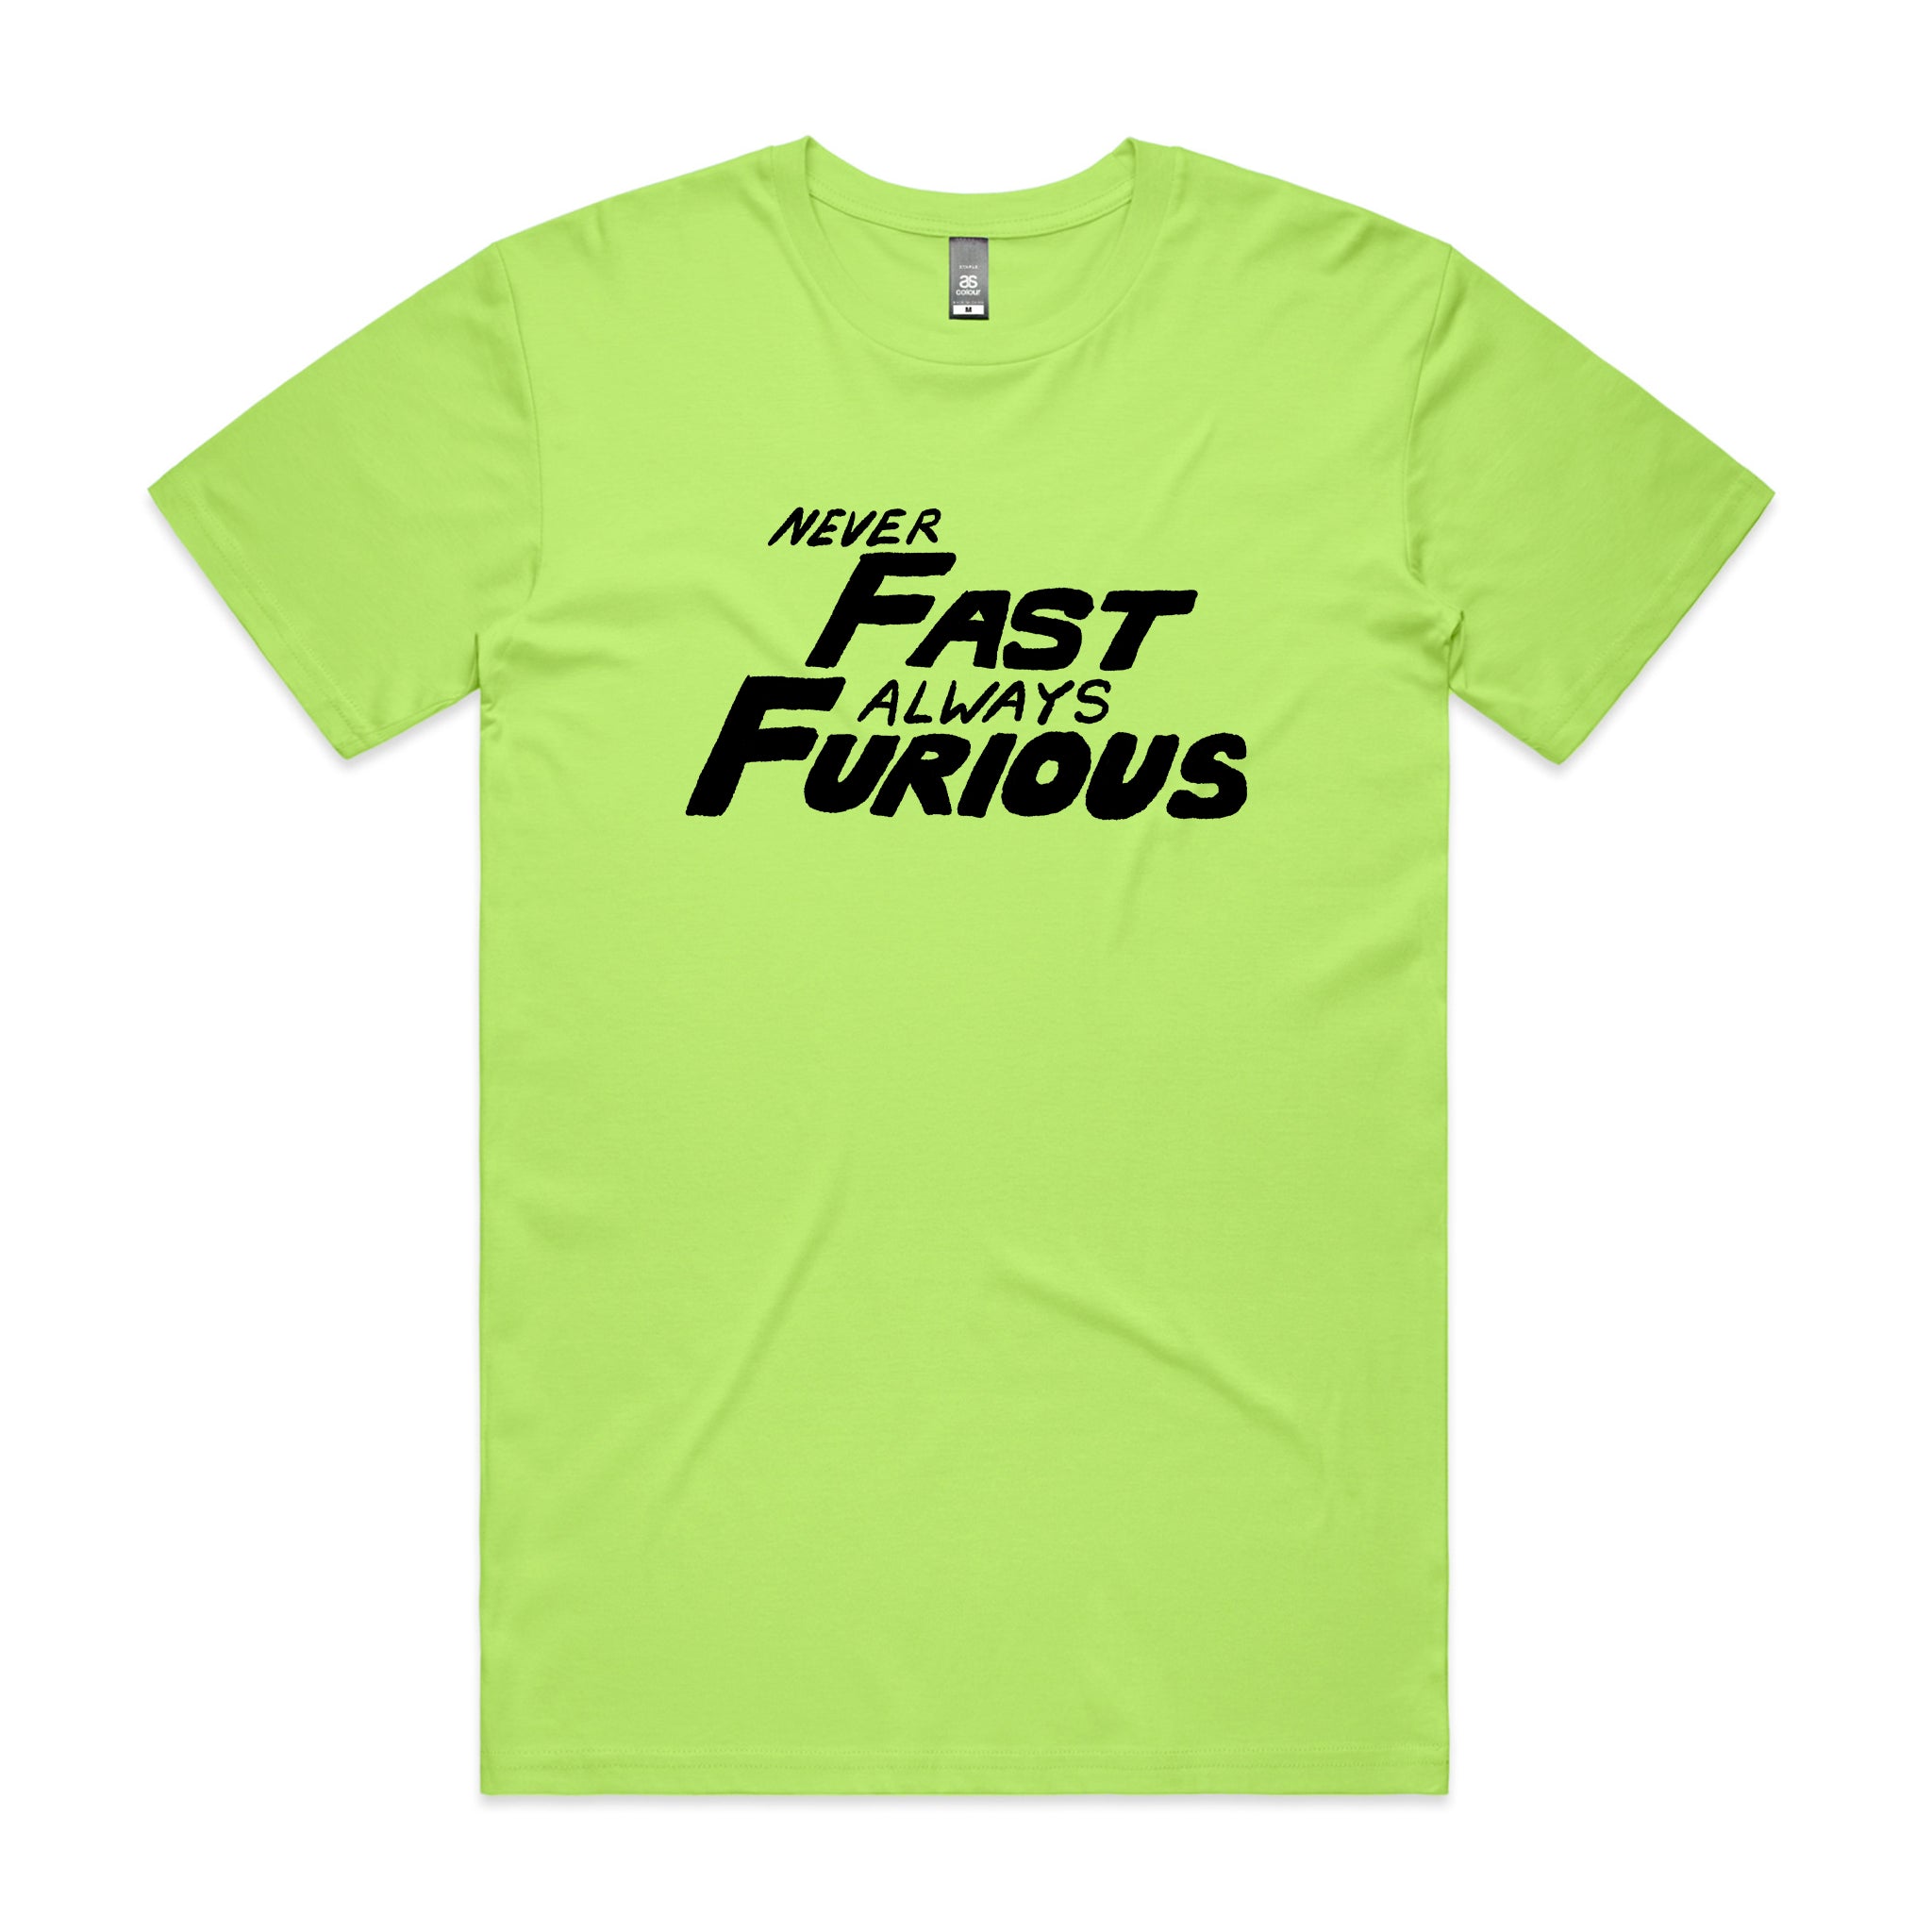 Never Fast Always Furious Tee